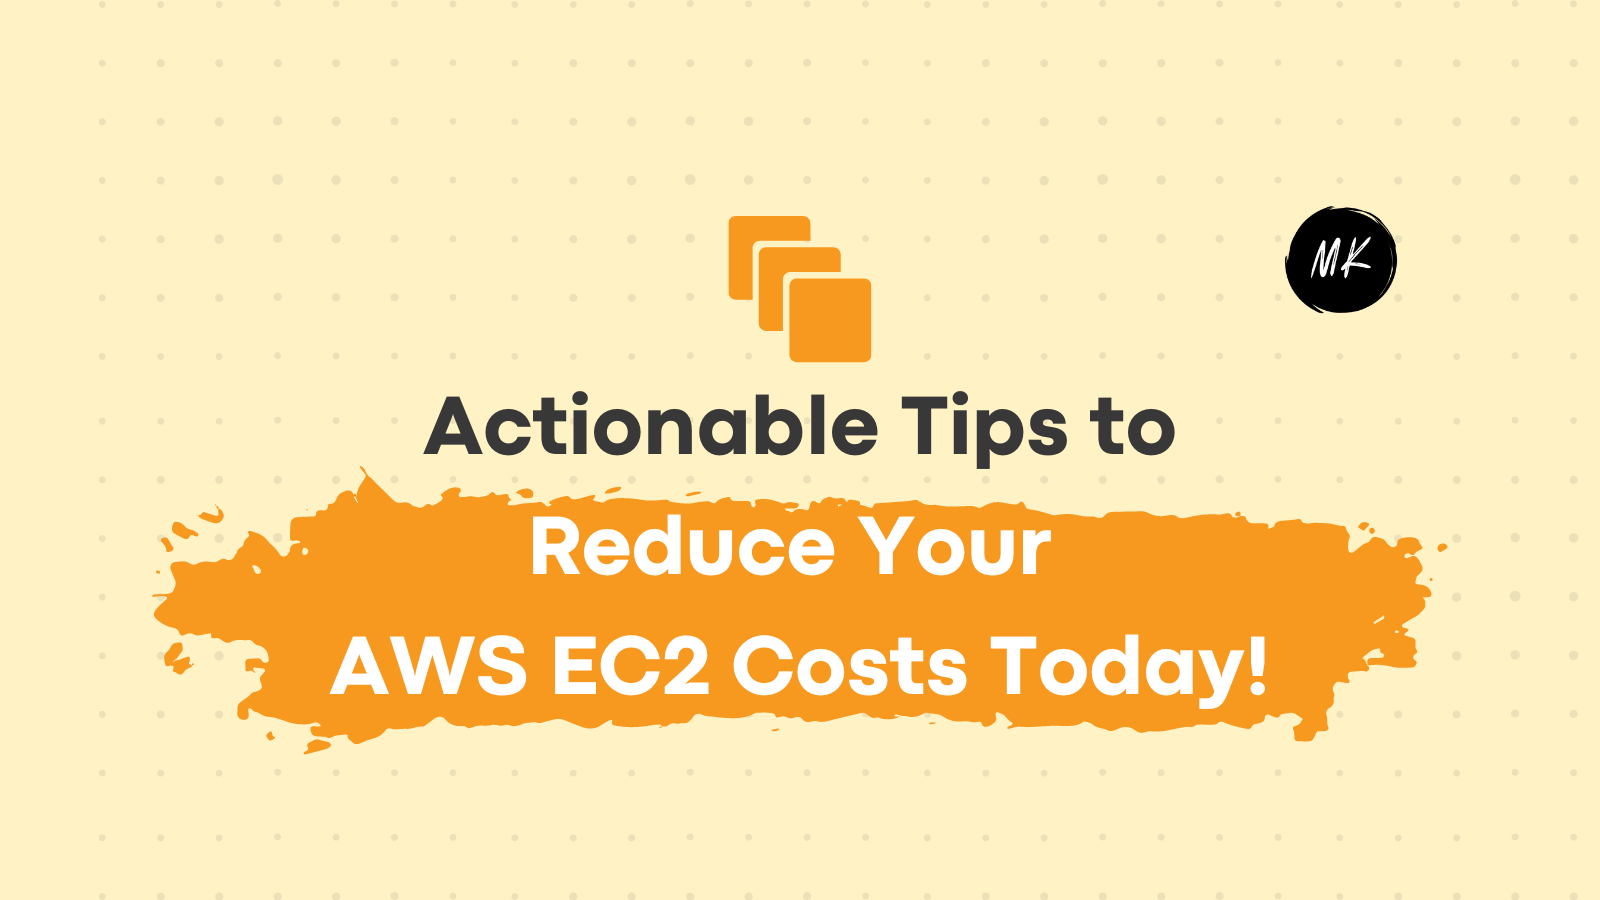 Actionable Tips to Reduce Your AWS EC2 Costs Today!